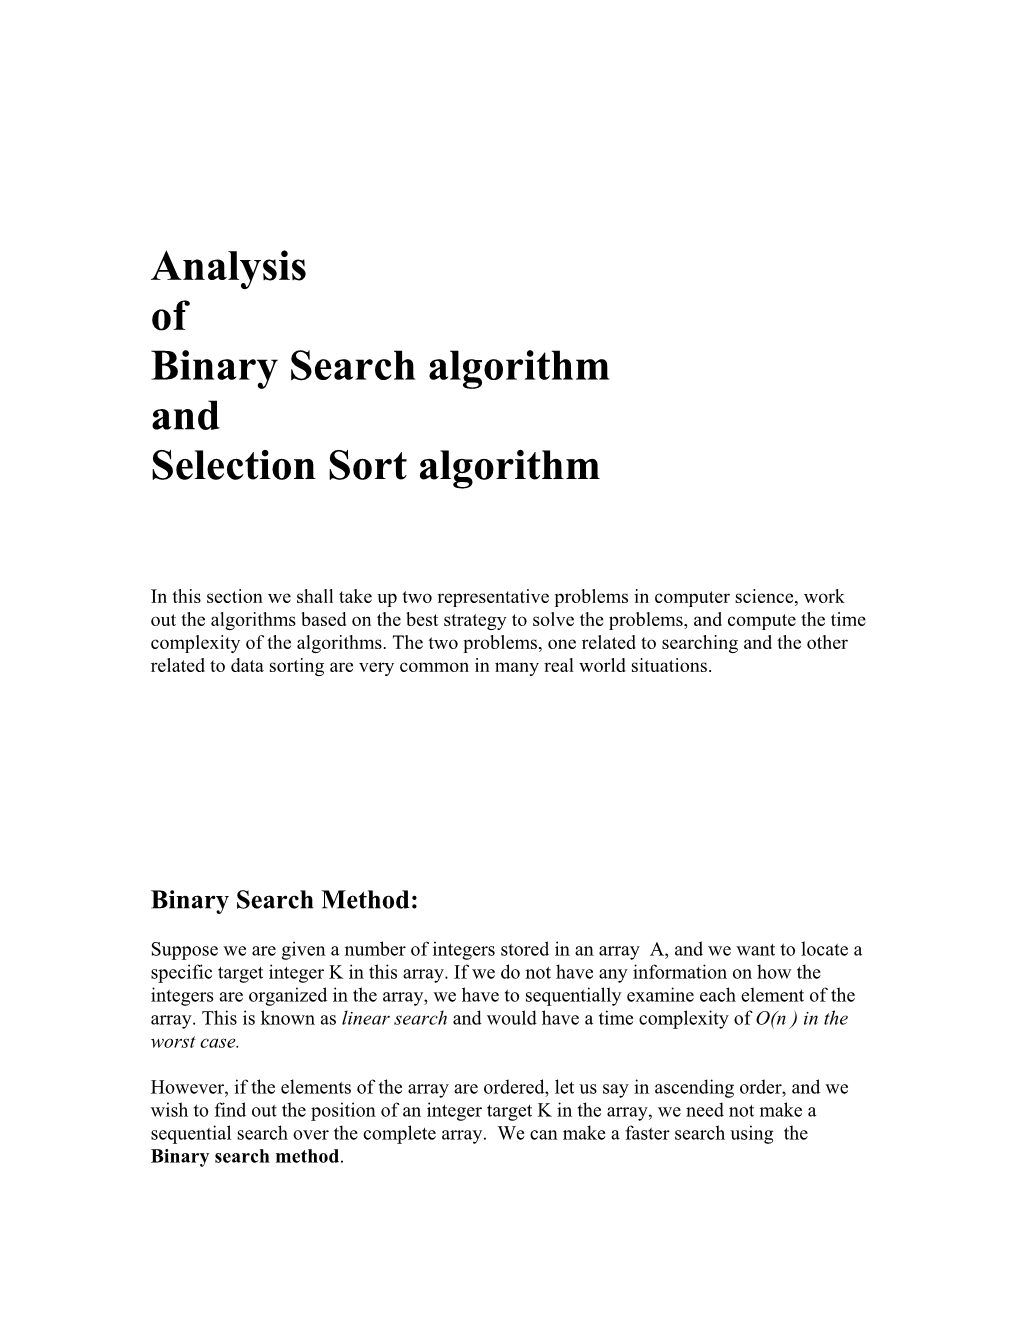 Analysis of Binary Search Algorithm and Selection Sort Algorithm